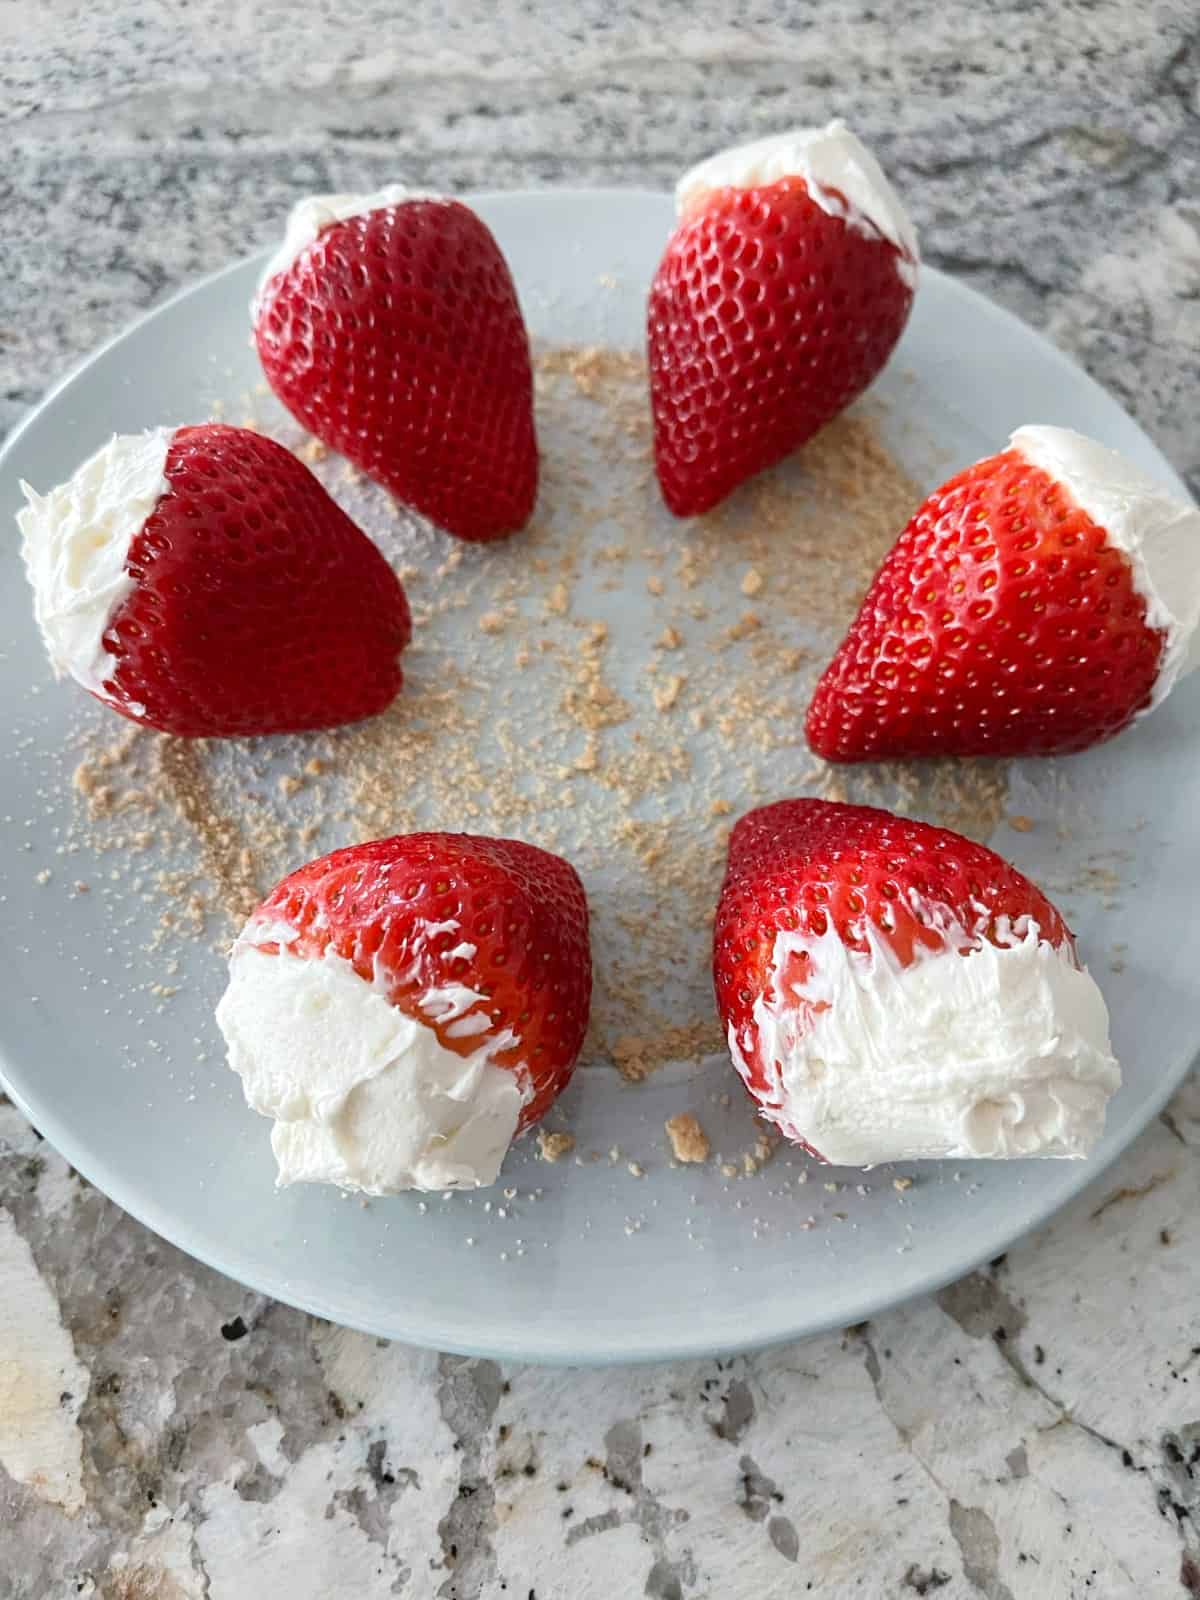 Cheesecake filled strawberries on a round plate sprinkled with graham cracker crumbs.